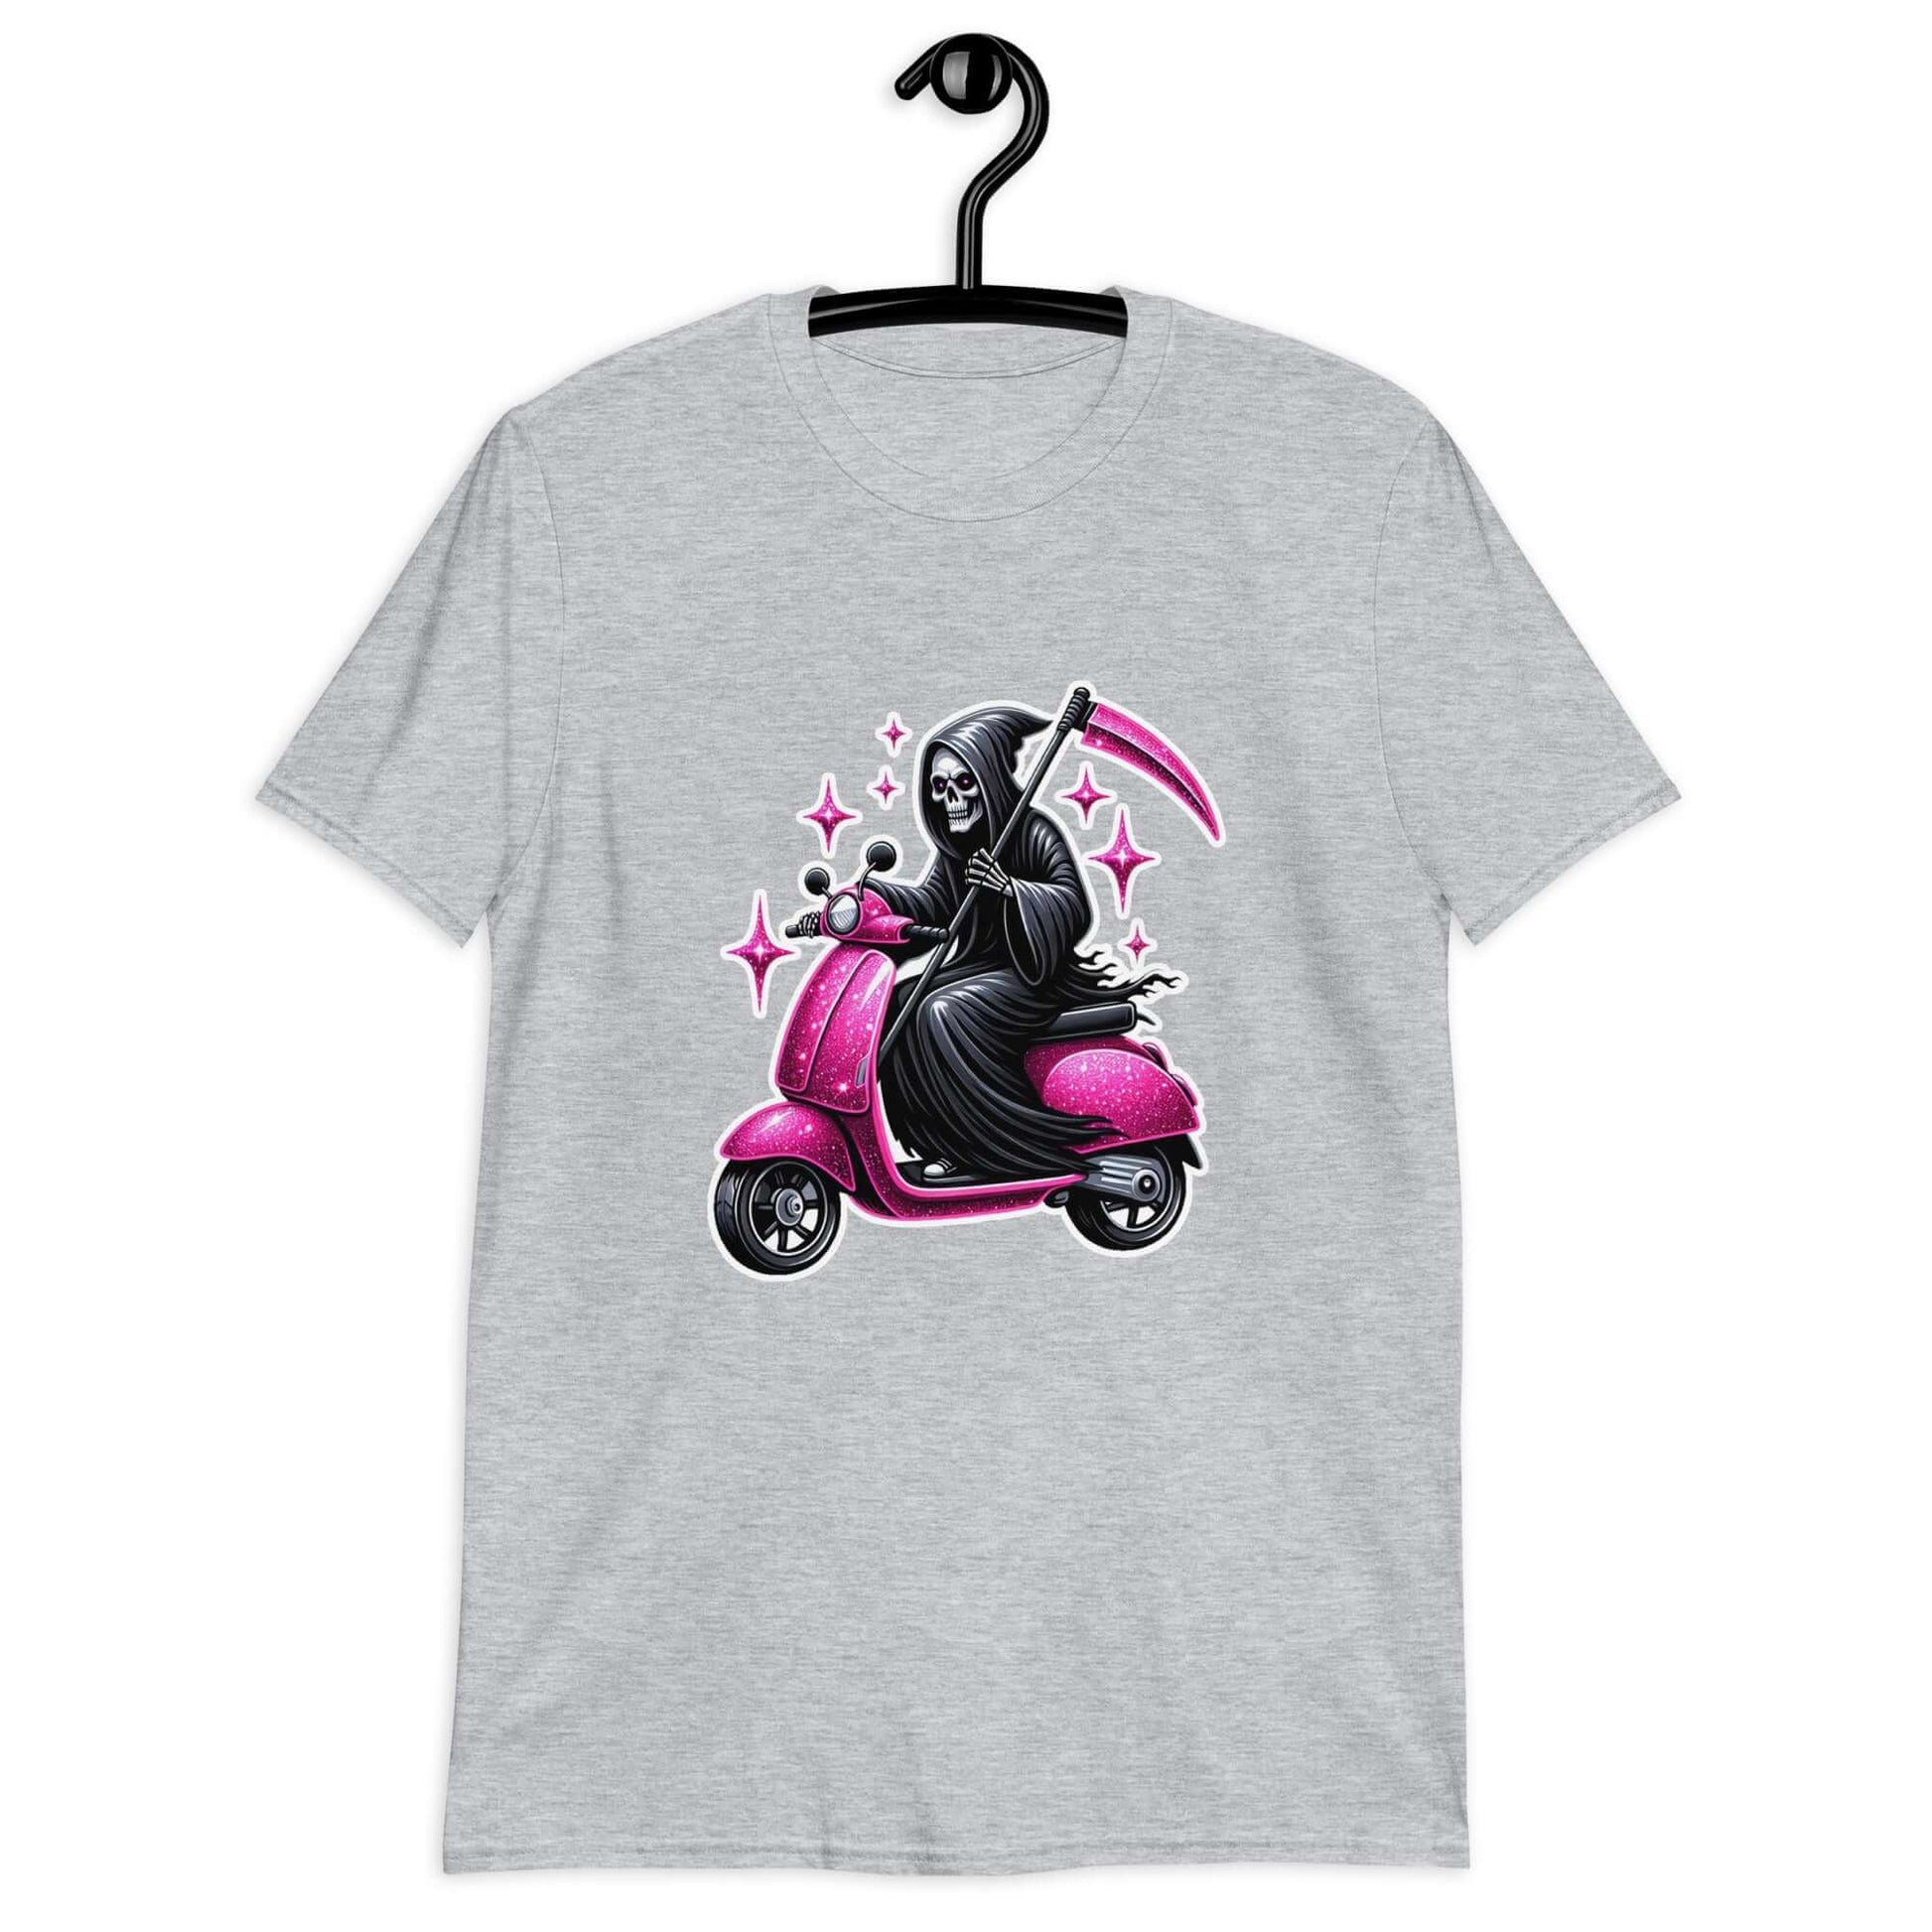 Light grey t-shirt with an image of the Grim Reaper riding on a glam pink scooter printed on the front.